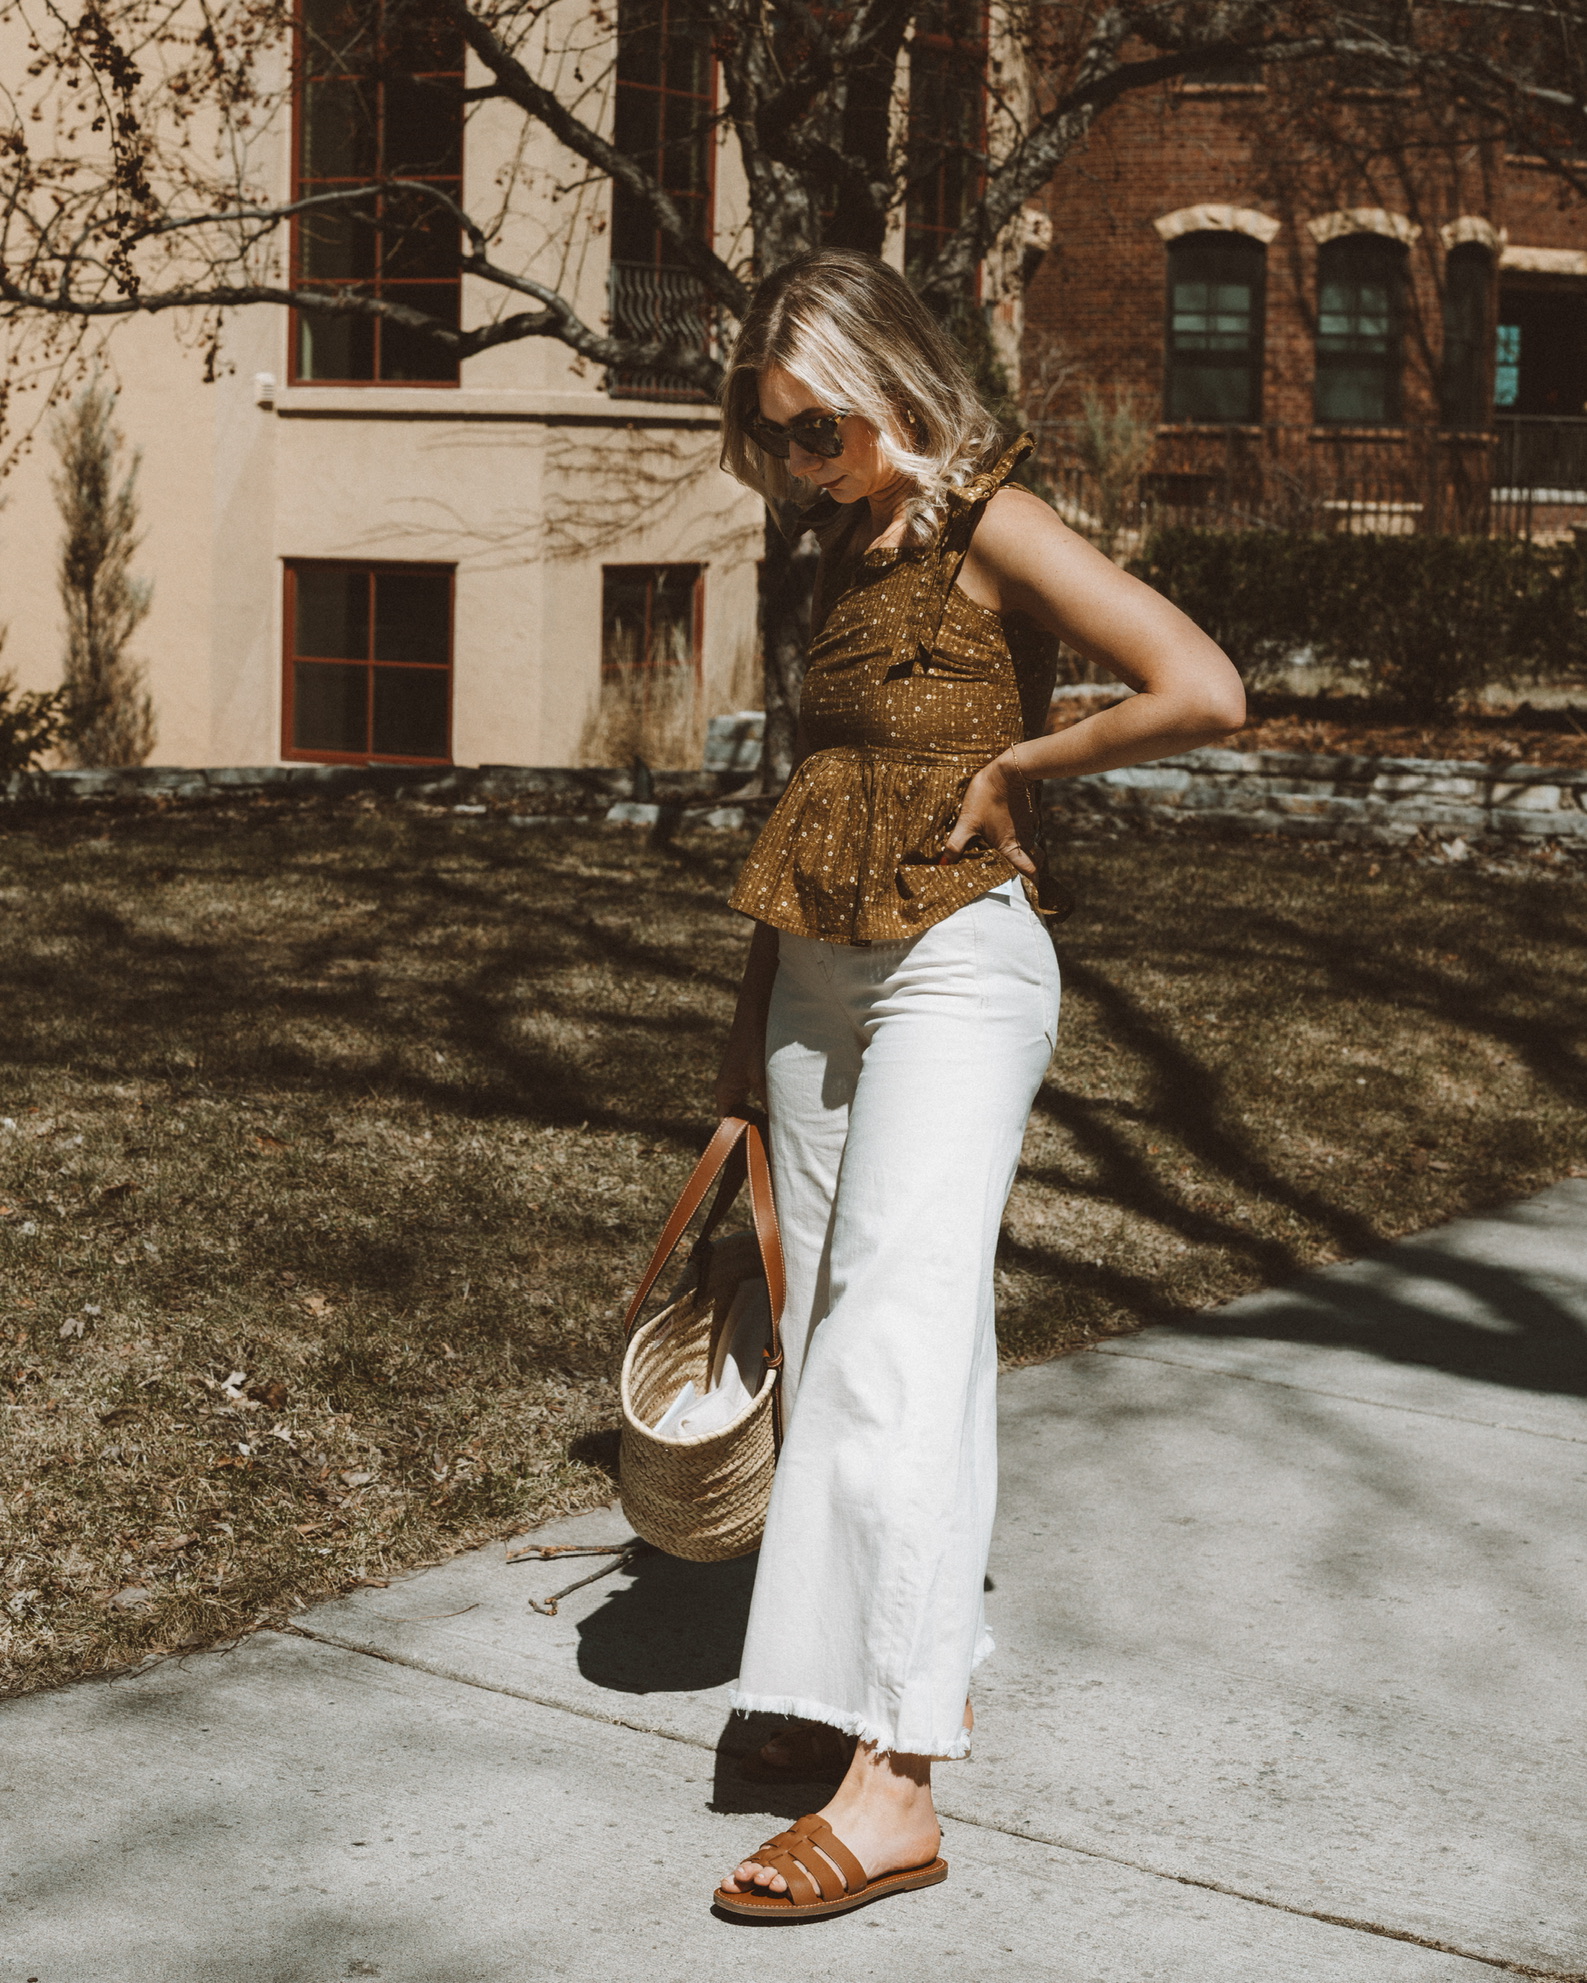 Karin Emily wears a brown peplum tank, white wide leg jeans, and brown designer dupe sandals